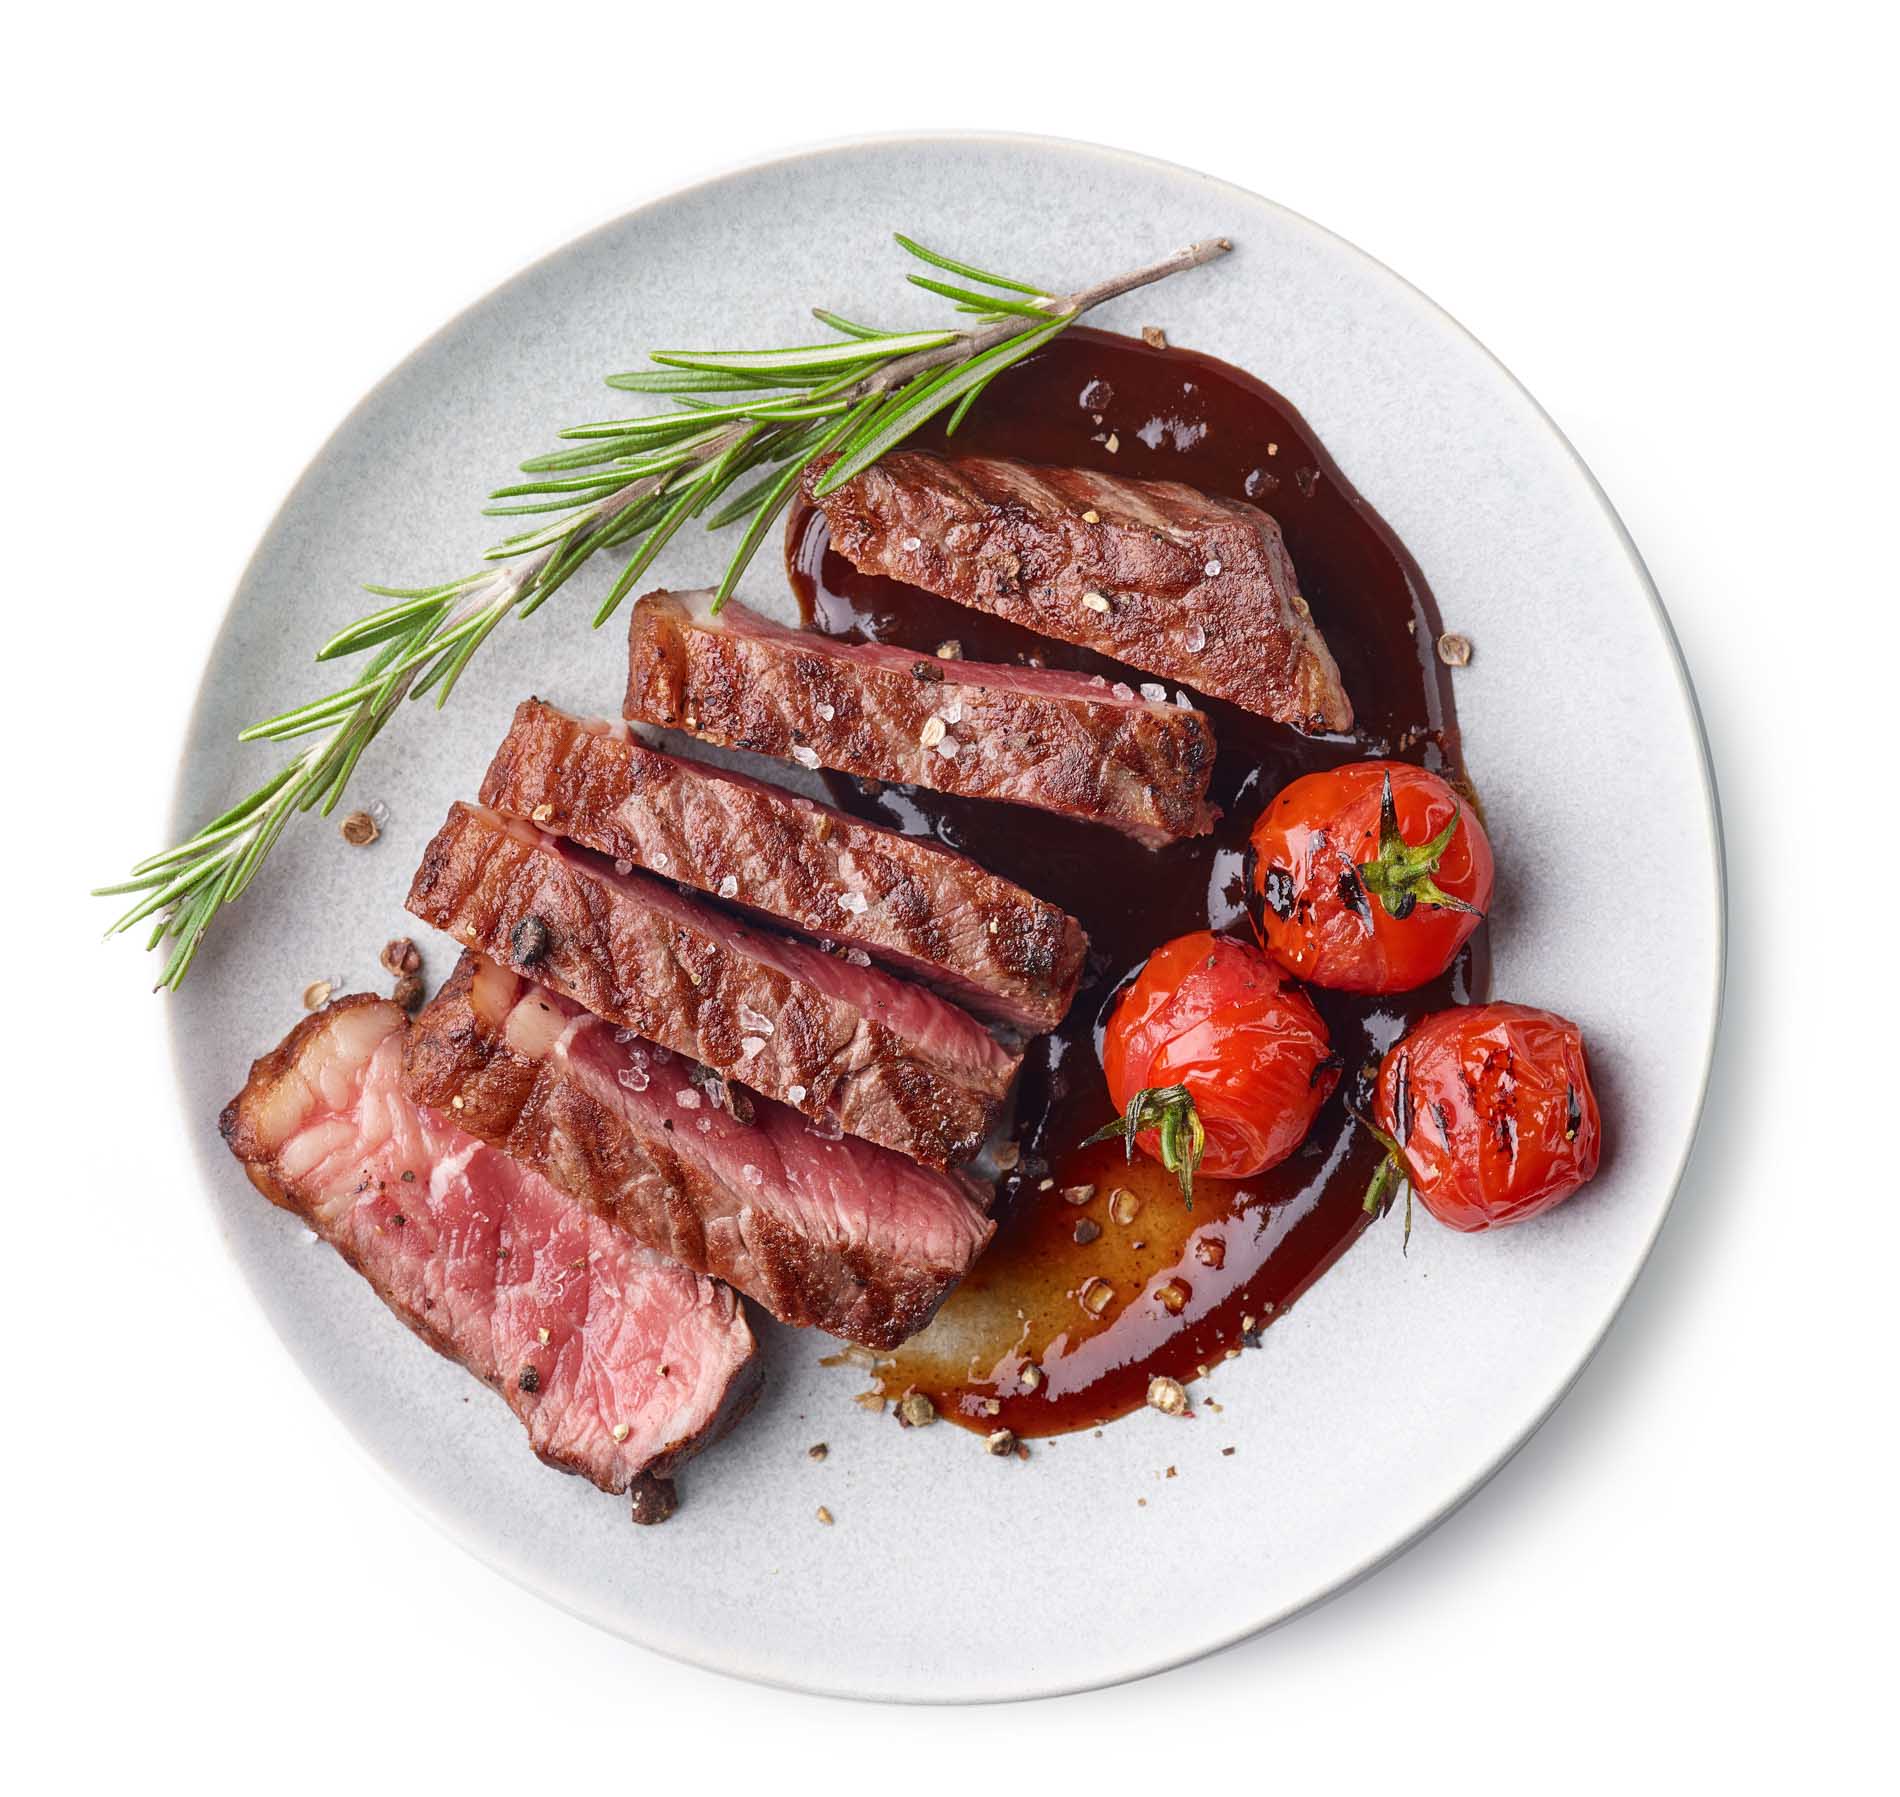 Grilled,Sliced,Beef,Steak,With,Tomatoes,And,Rosemary,On,A